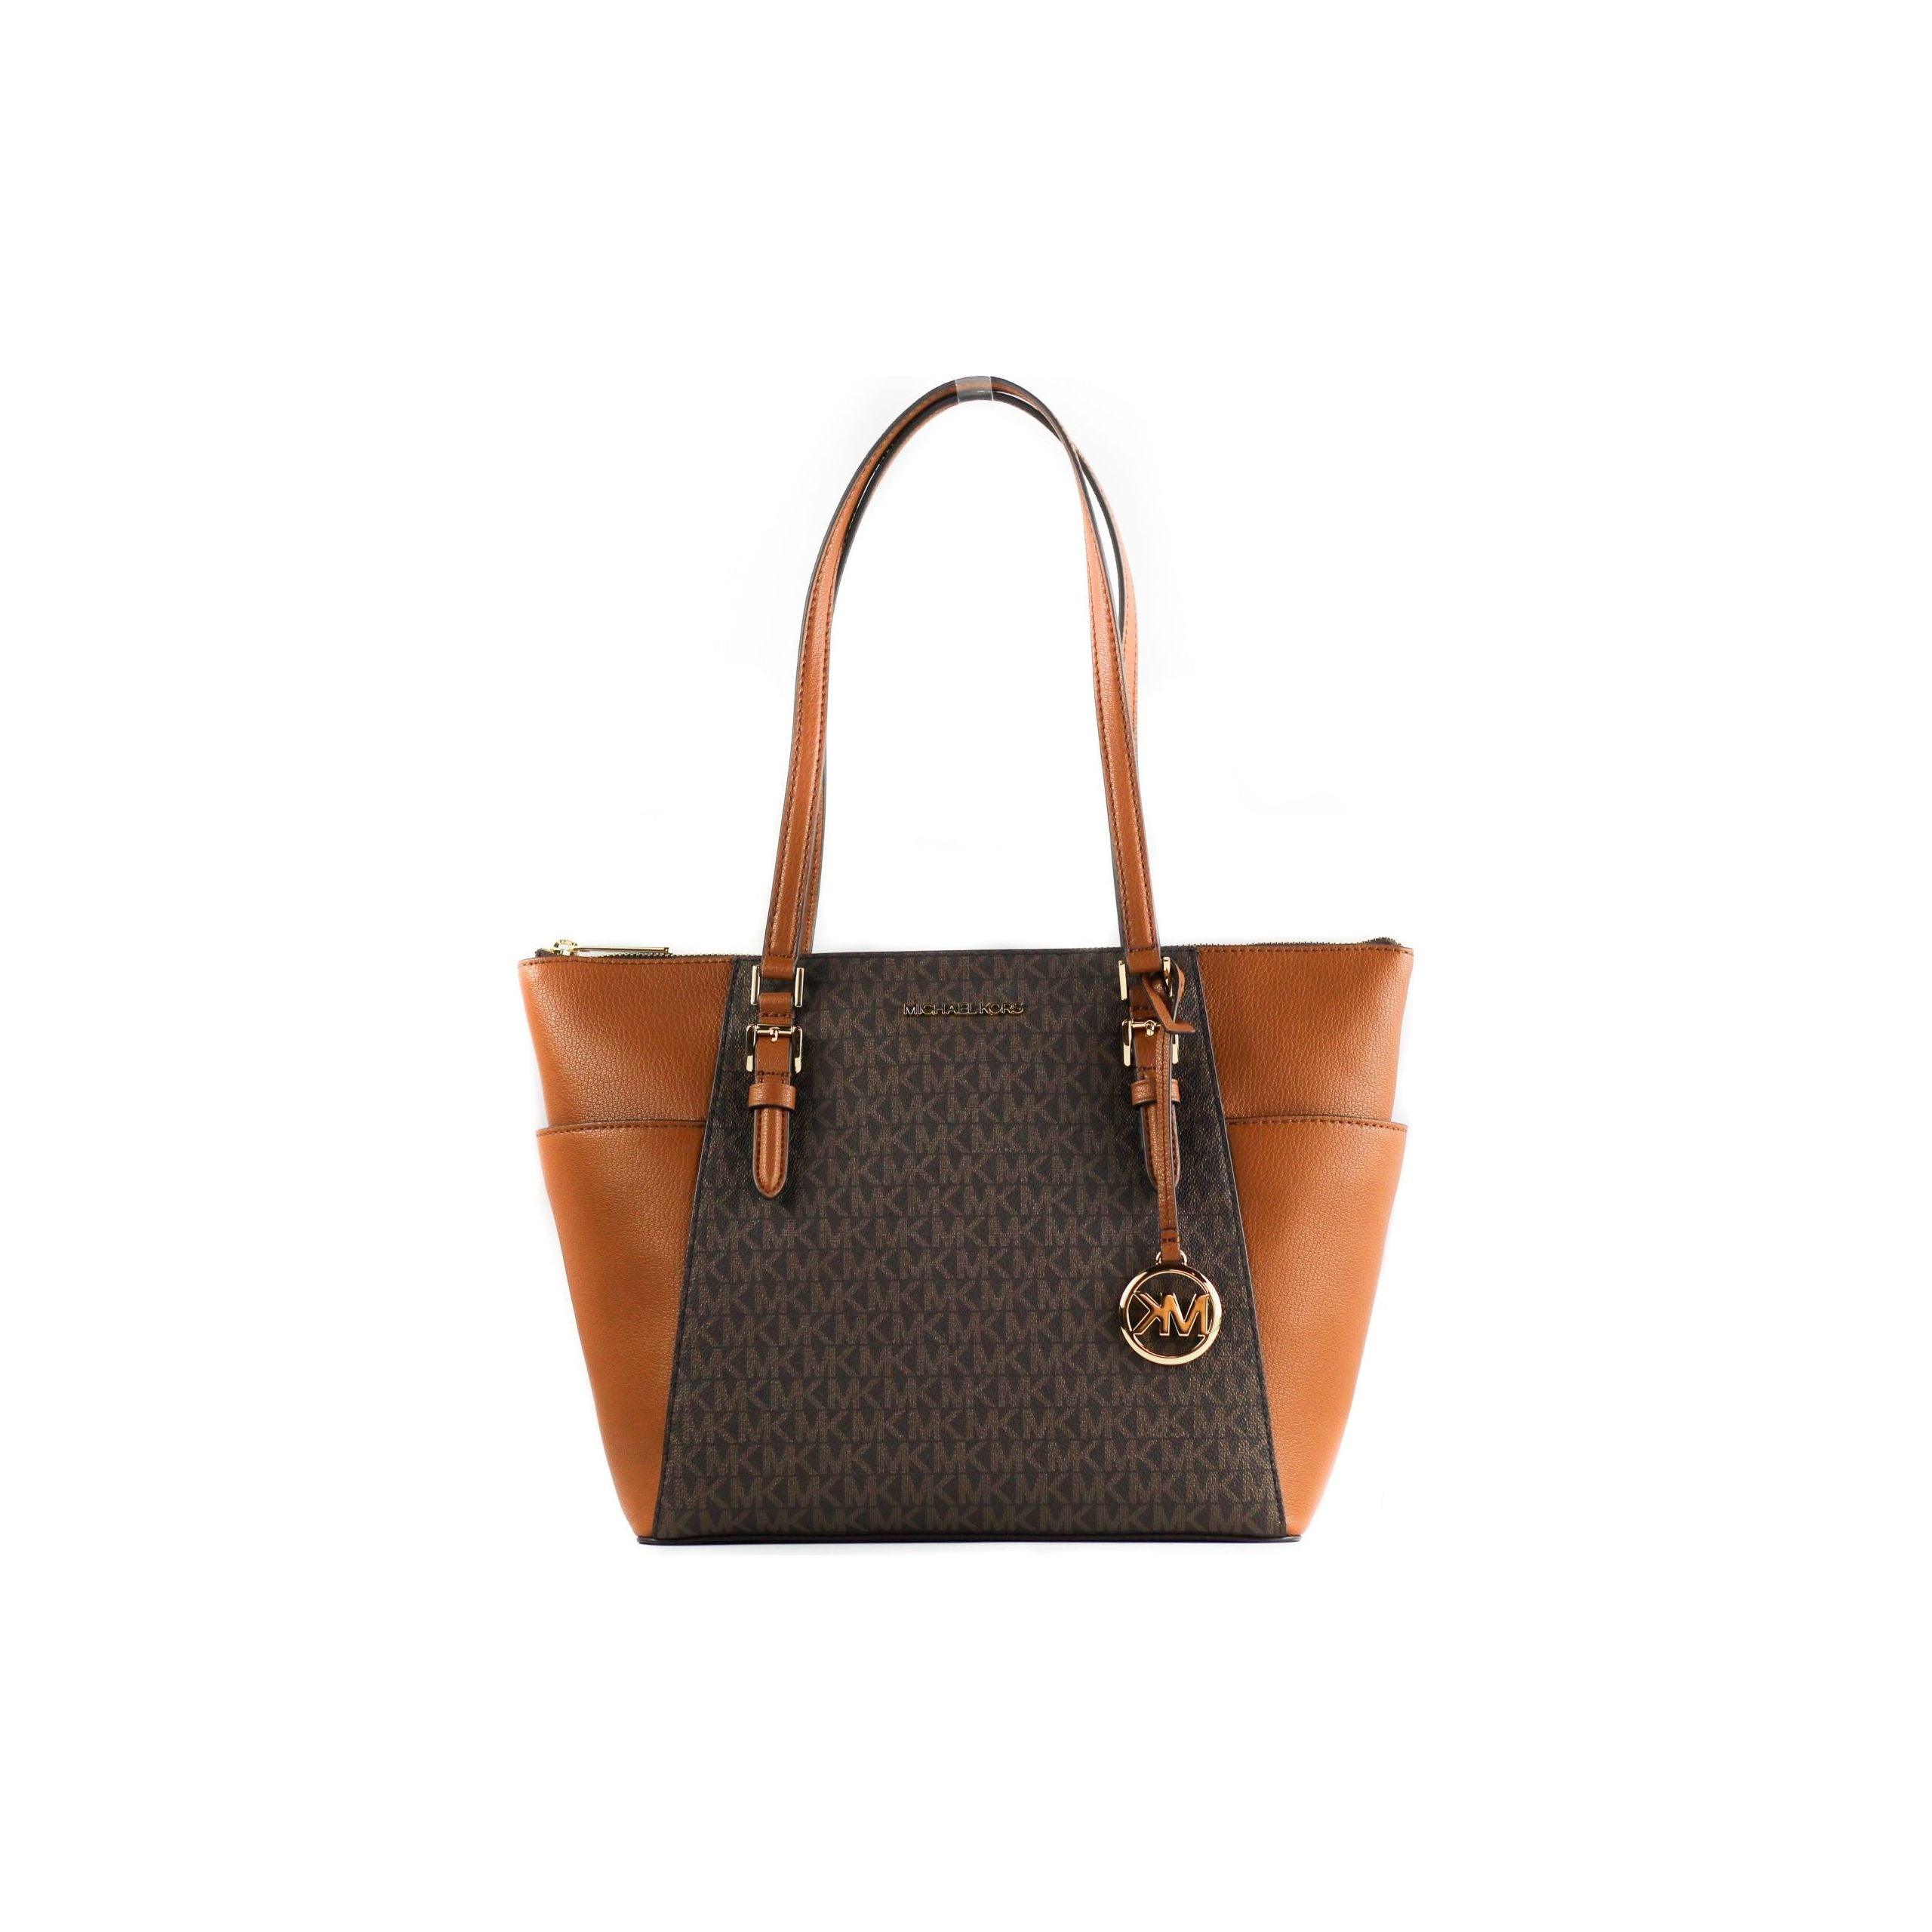 MICHAEL Kors Brown Leather Large Top Zip Tote Bag - OBY BAGS